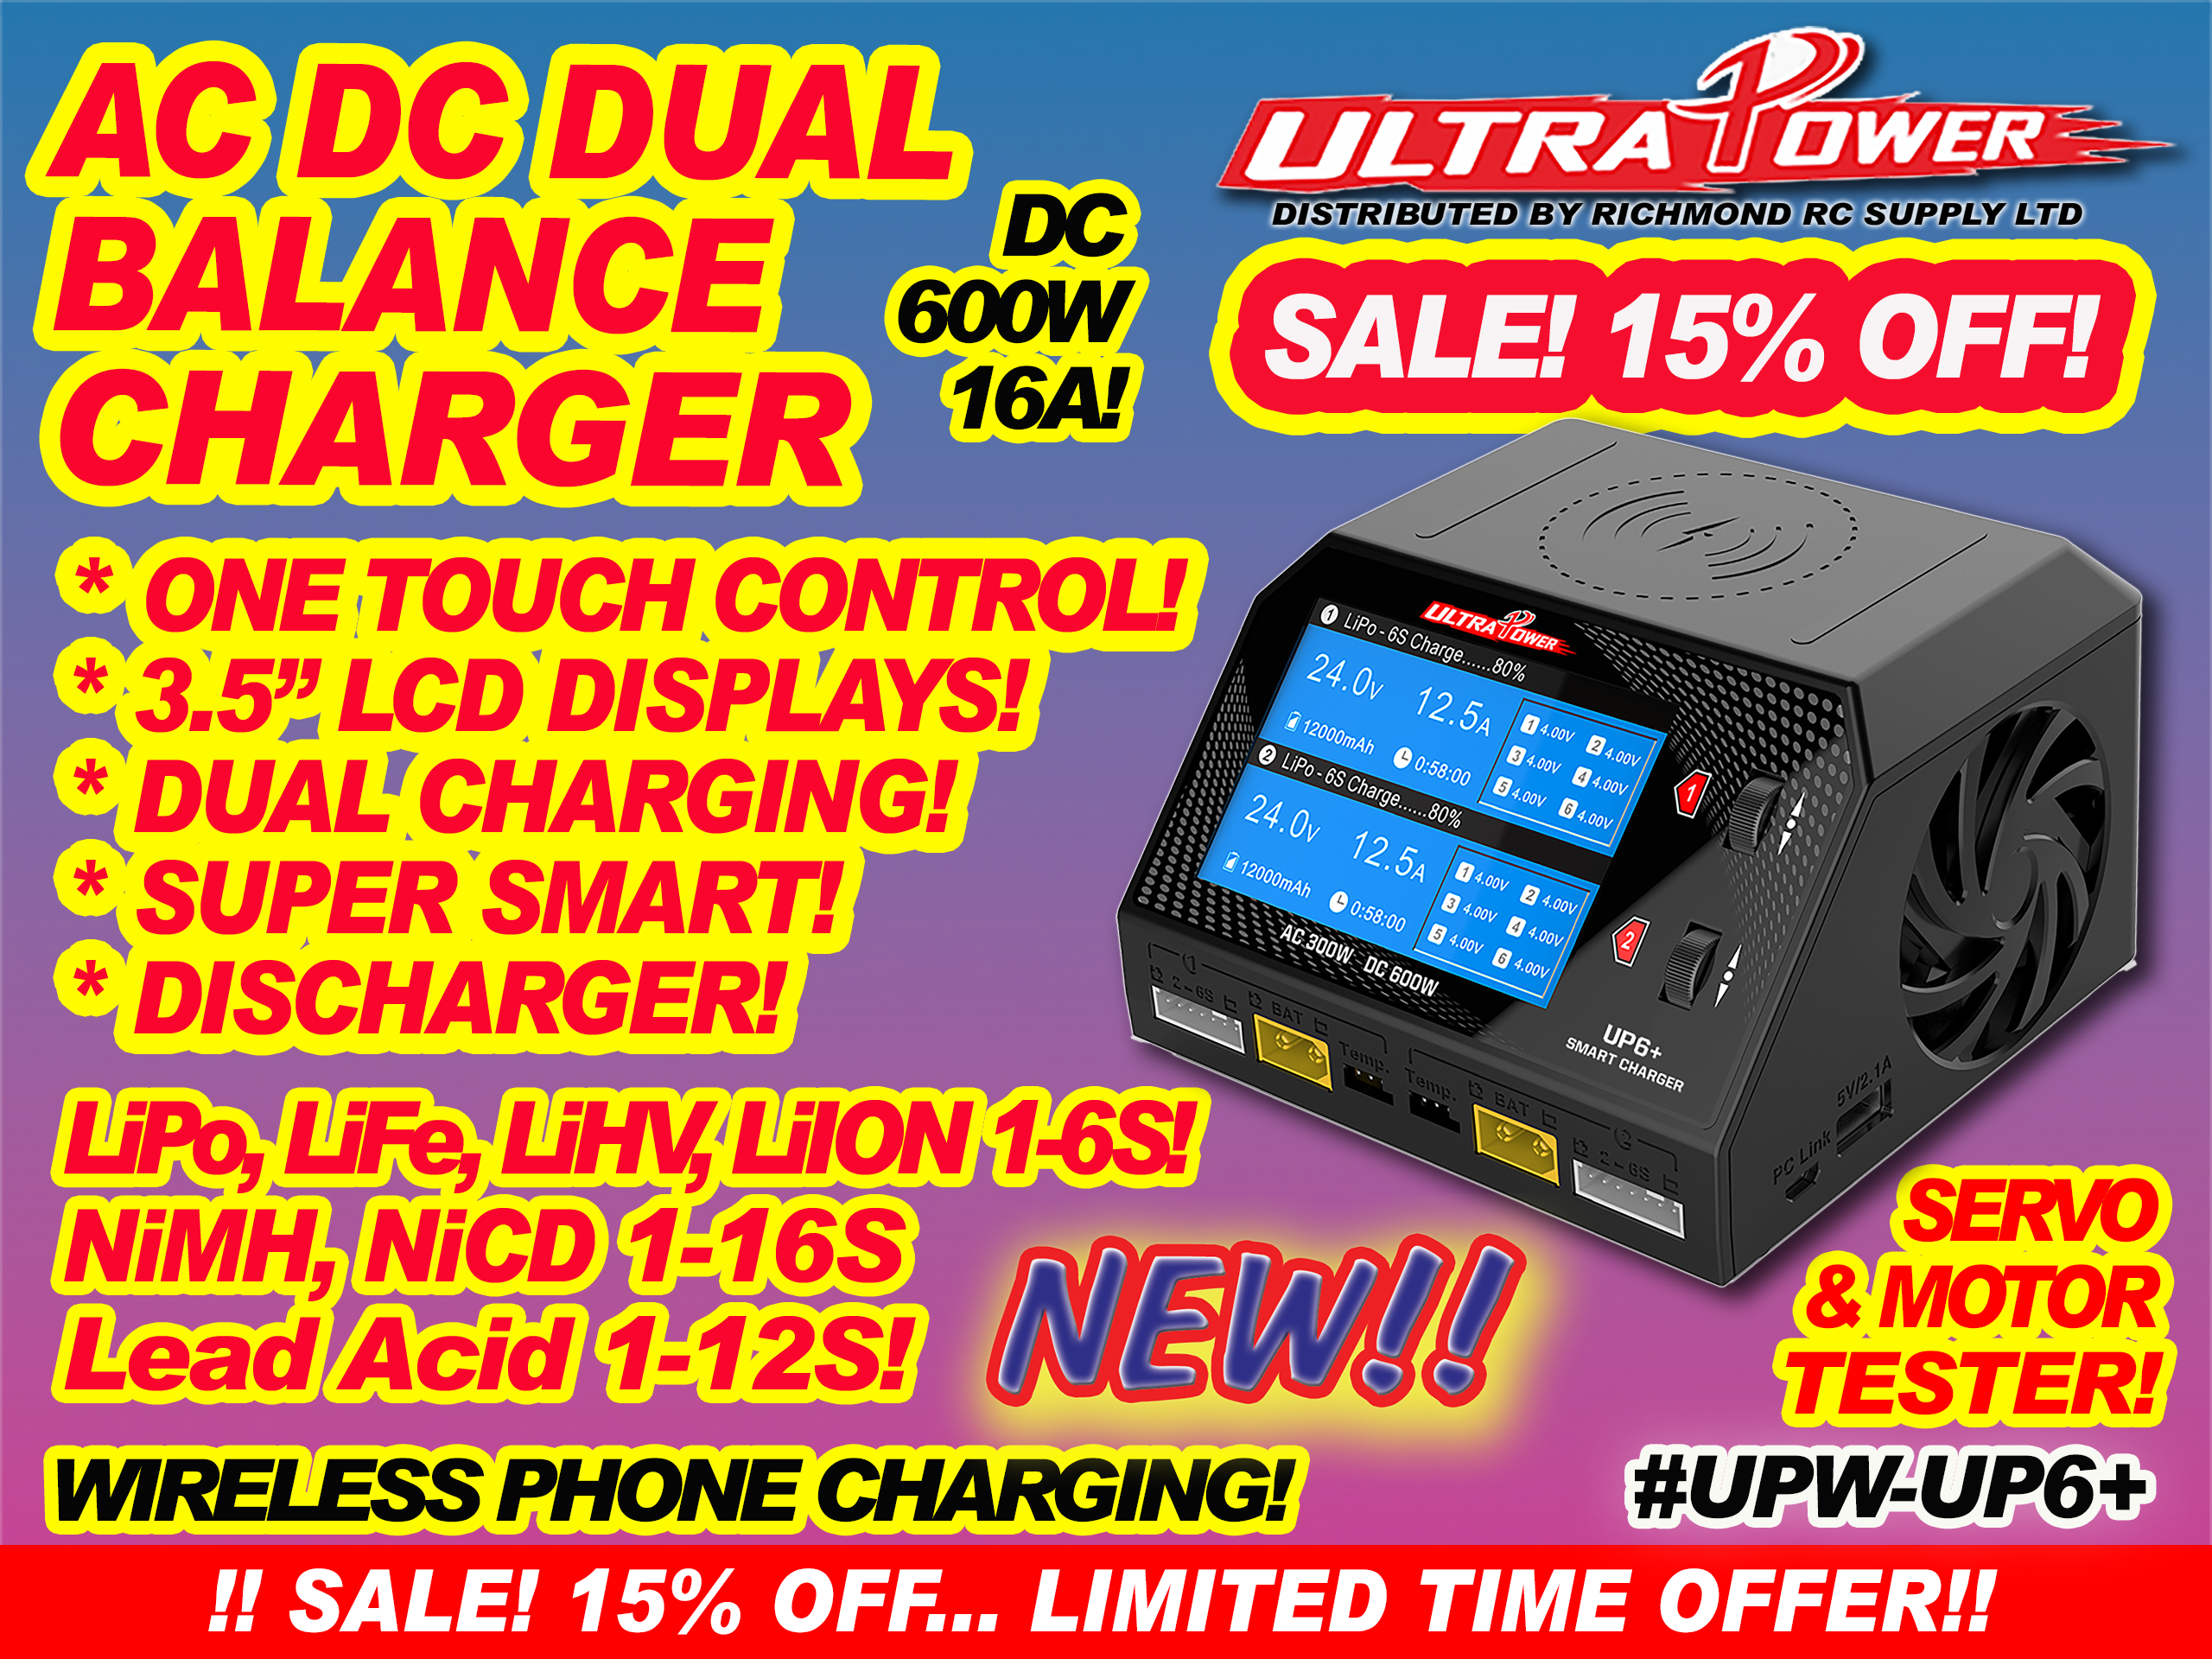 ULTRA POWER CHARGER - AC-DC, 600W 16A DUAL w/LCDx2  [ 91907]